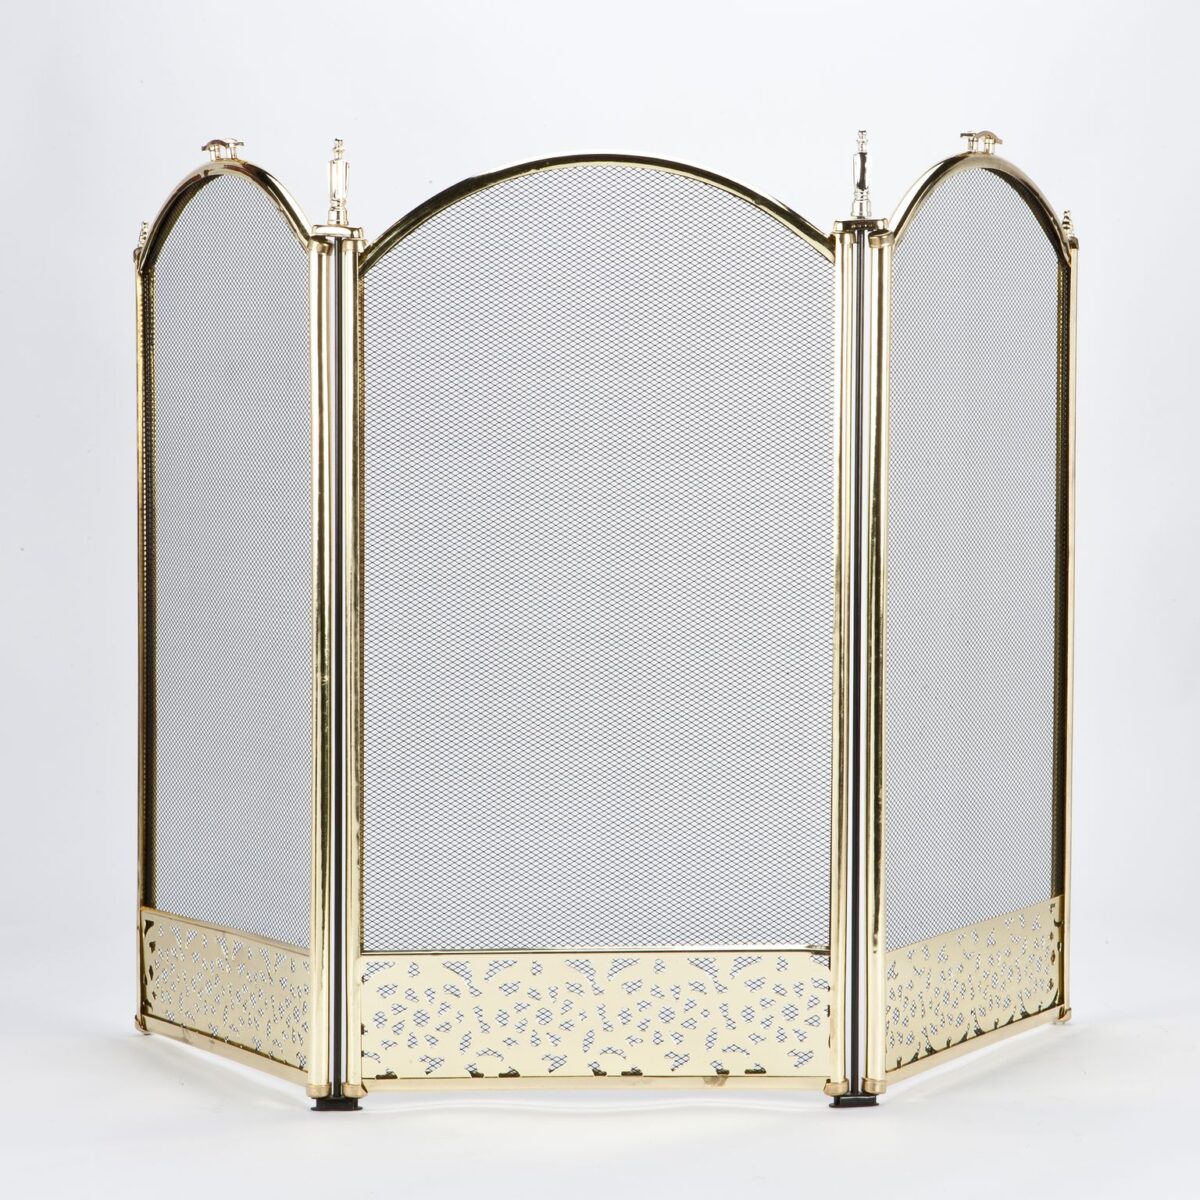 3 Panel Firescreen With Filigree - All Brass Finish